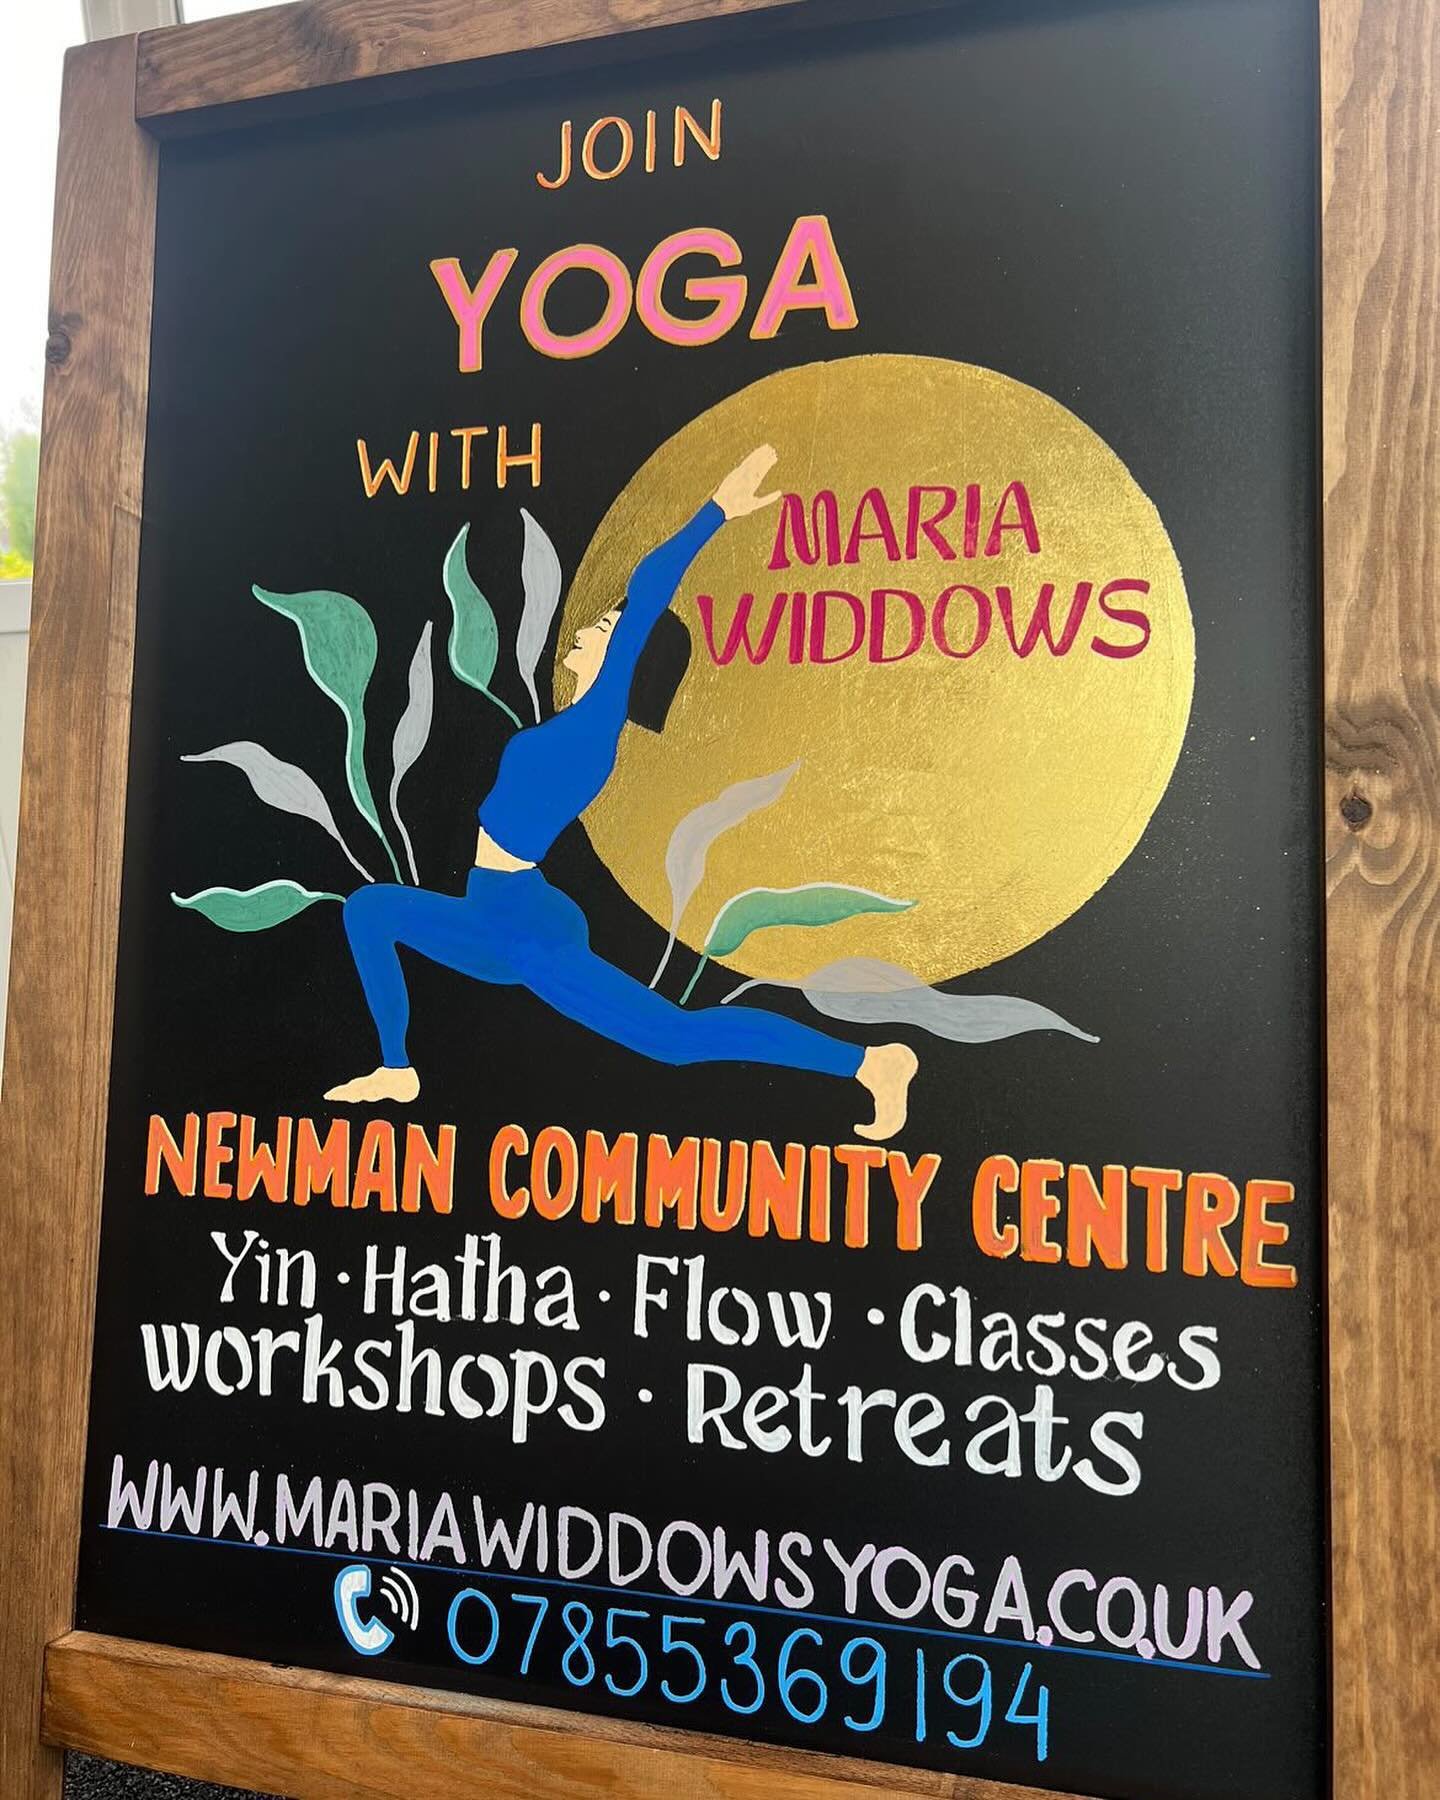 Come &amp; see the new sign tomorrow! 

And then come to yoga!!!

✨TUESDAY 9:30am✨
 Beginners &amp; Beyond
  Newman Centre, Boldmere

✨TUESDAY 12pm✨
 Gentle Yoga
  The Cancer Support Centre, 
  Sutton Coldfield

✨TUESDAY 7:15pm✨
 Yoga Flow
  Newman C